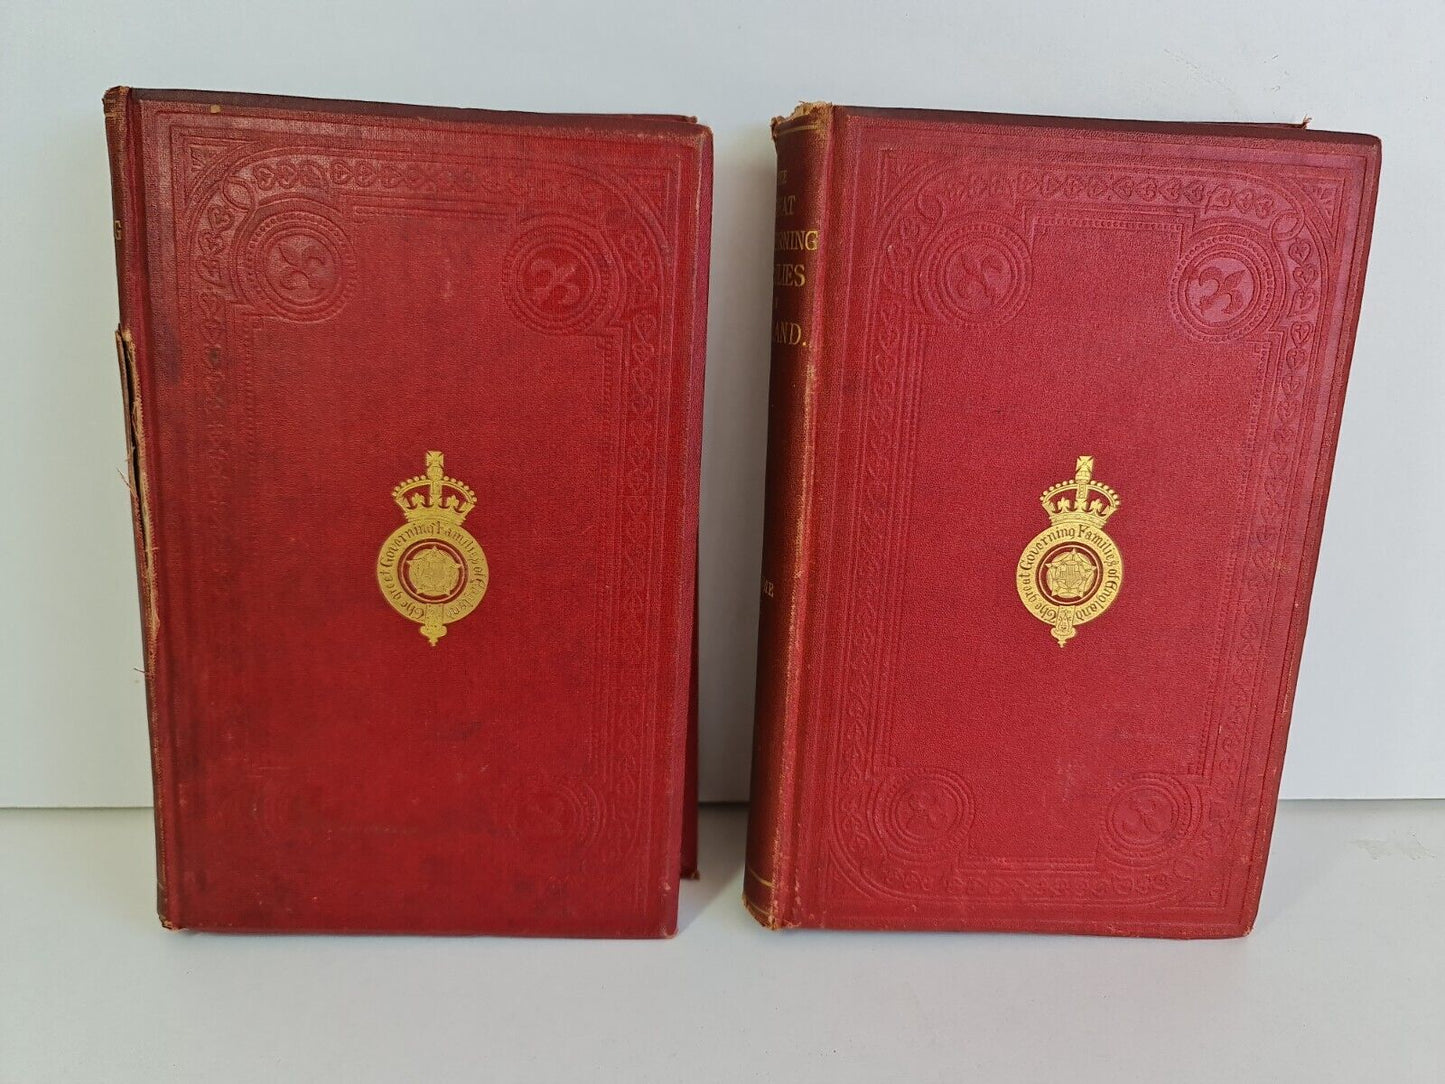 The Great Governing Families of England Vol 1-2 by J L Sanford (1865)